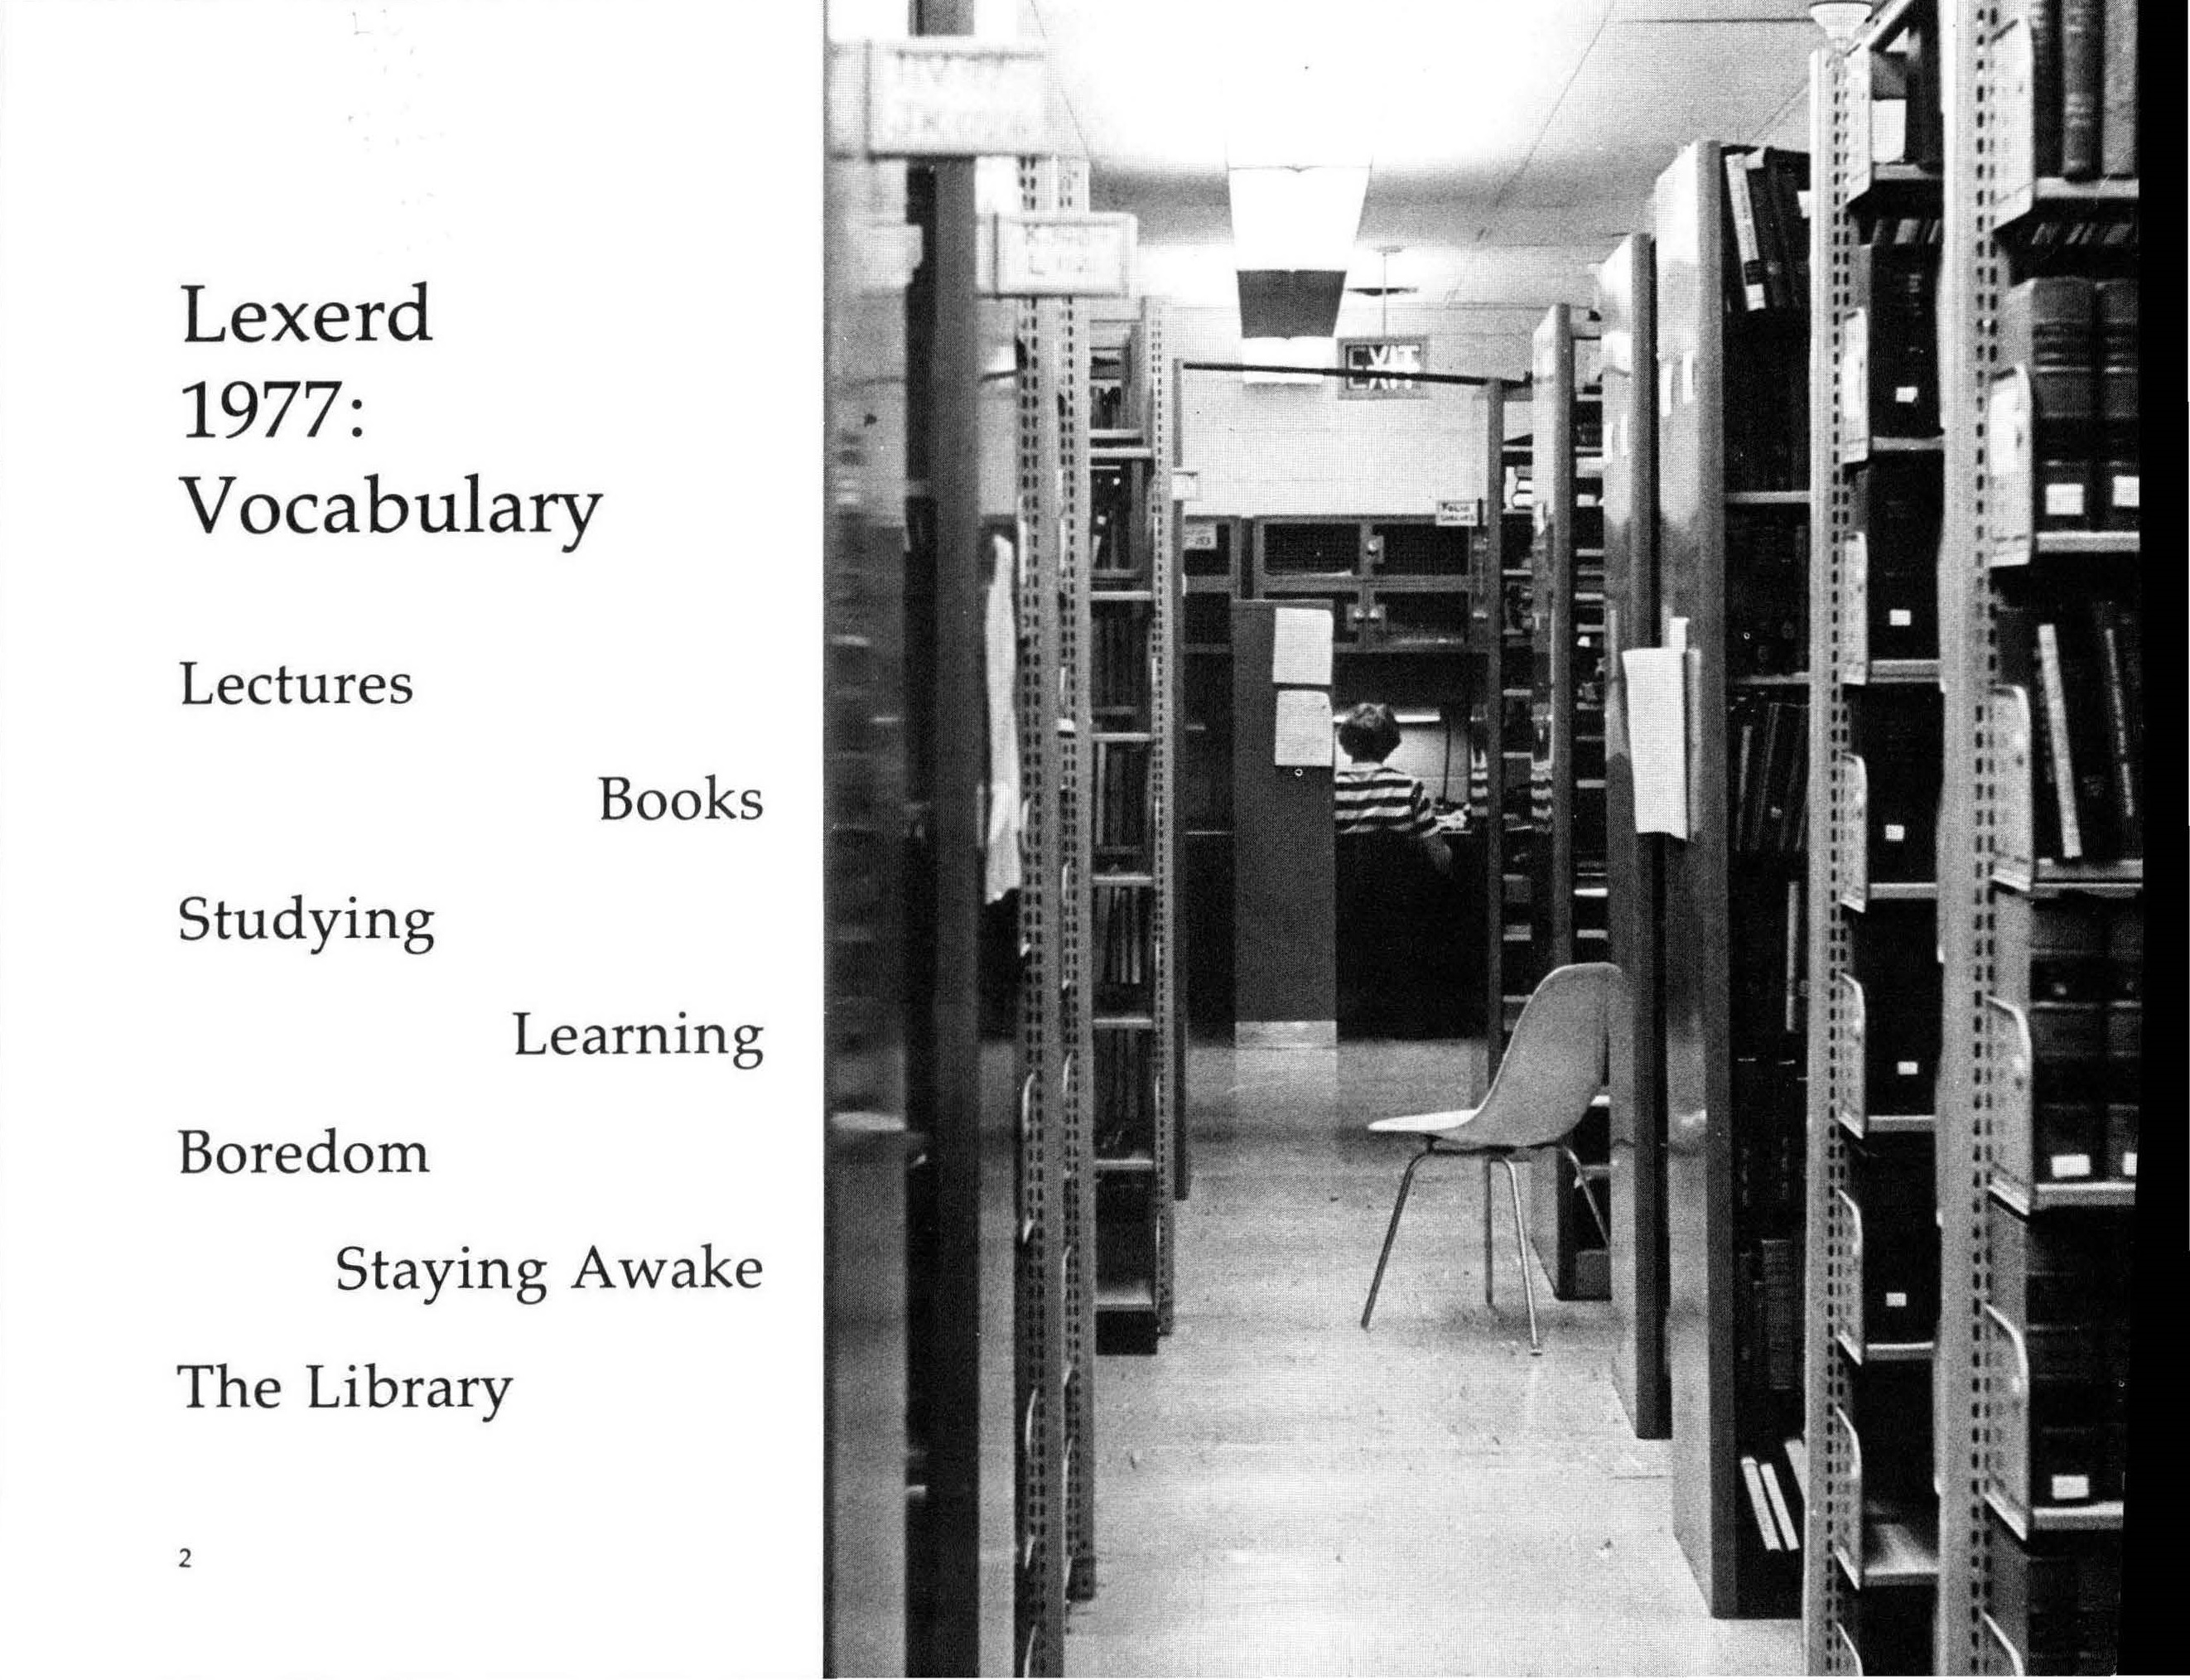 The library stacks